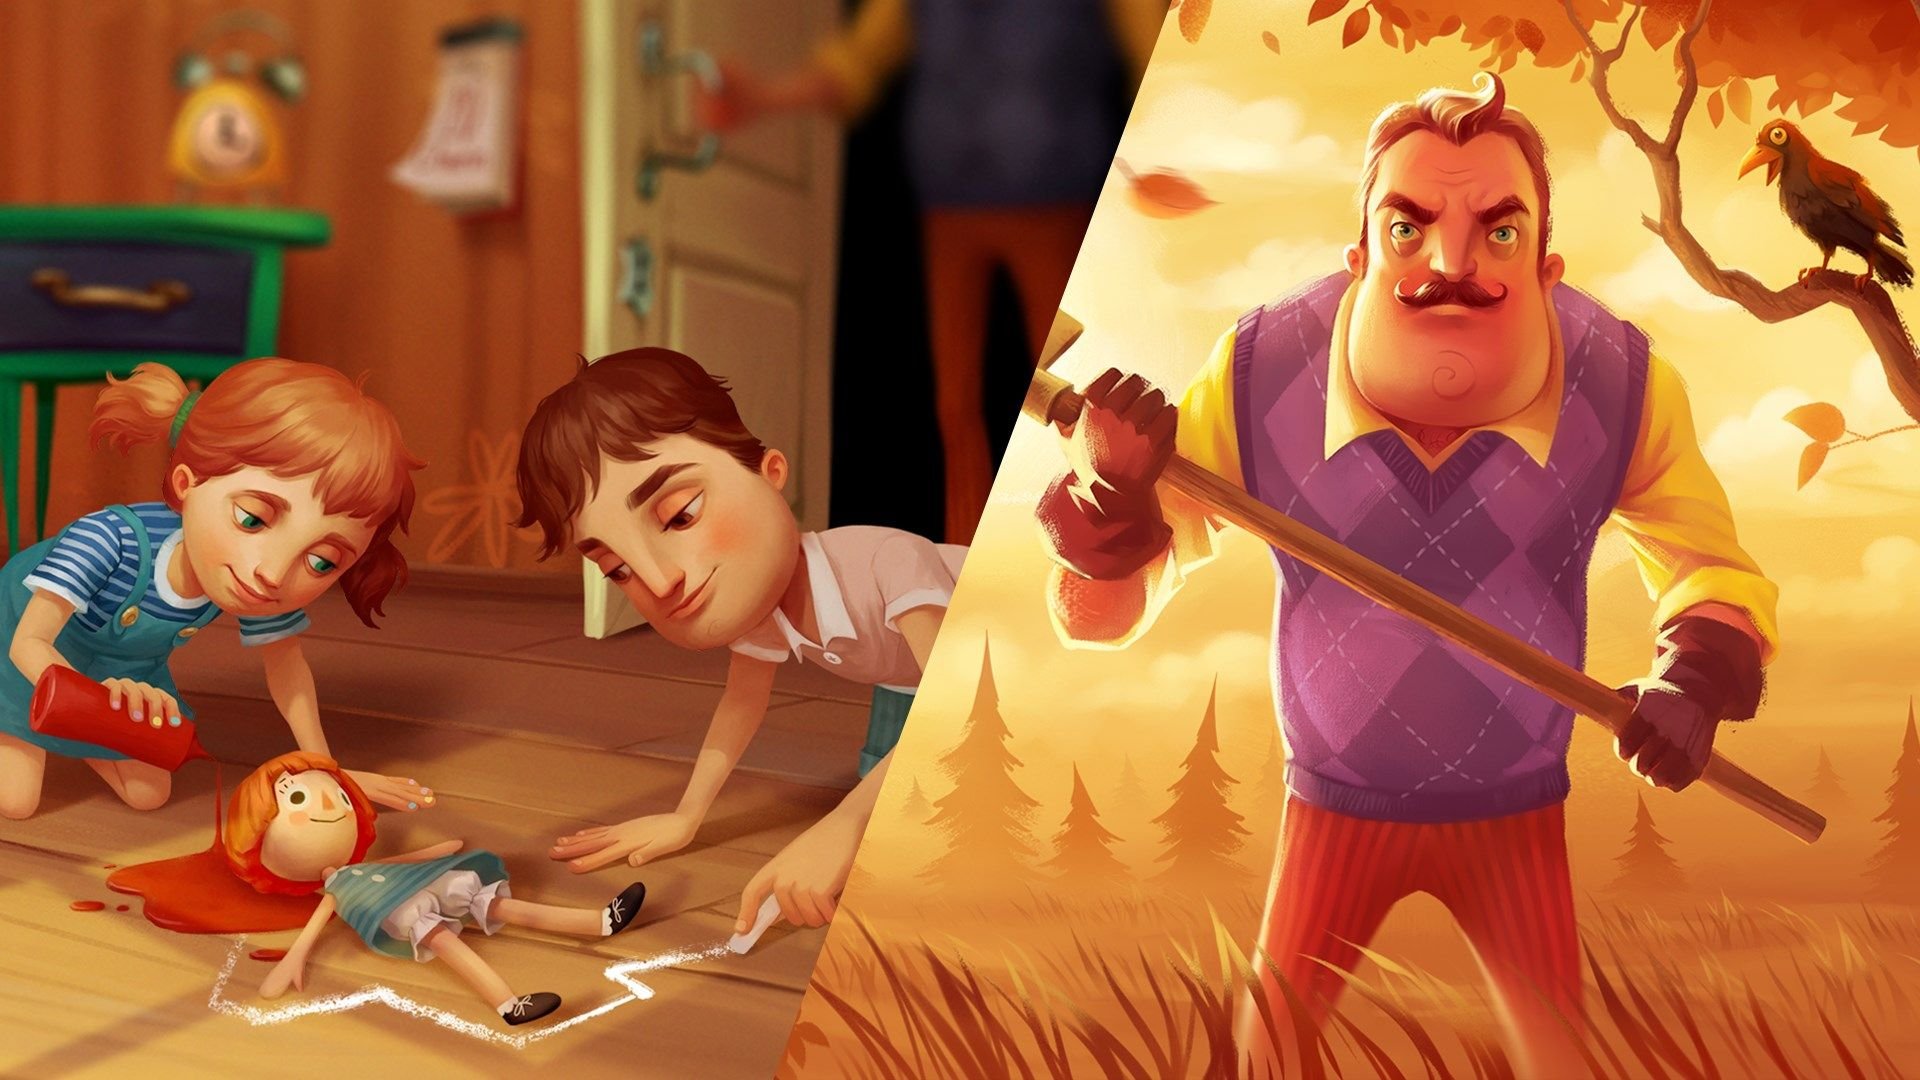 See more ideas about hello neighbor, hello, hello neighbor game. more about...